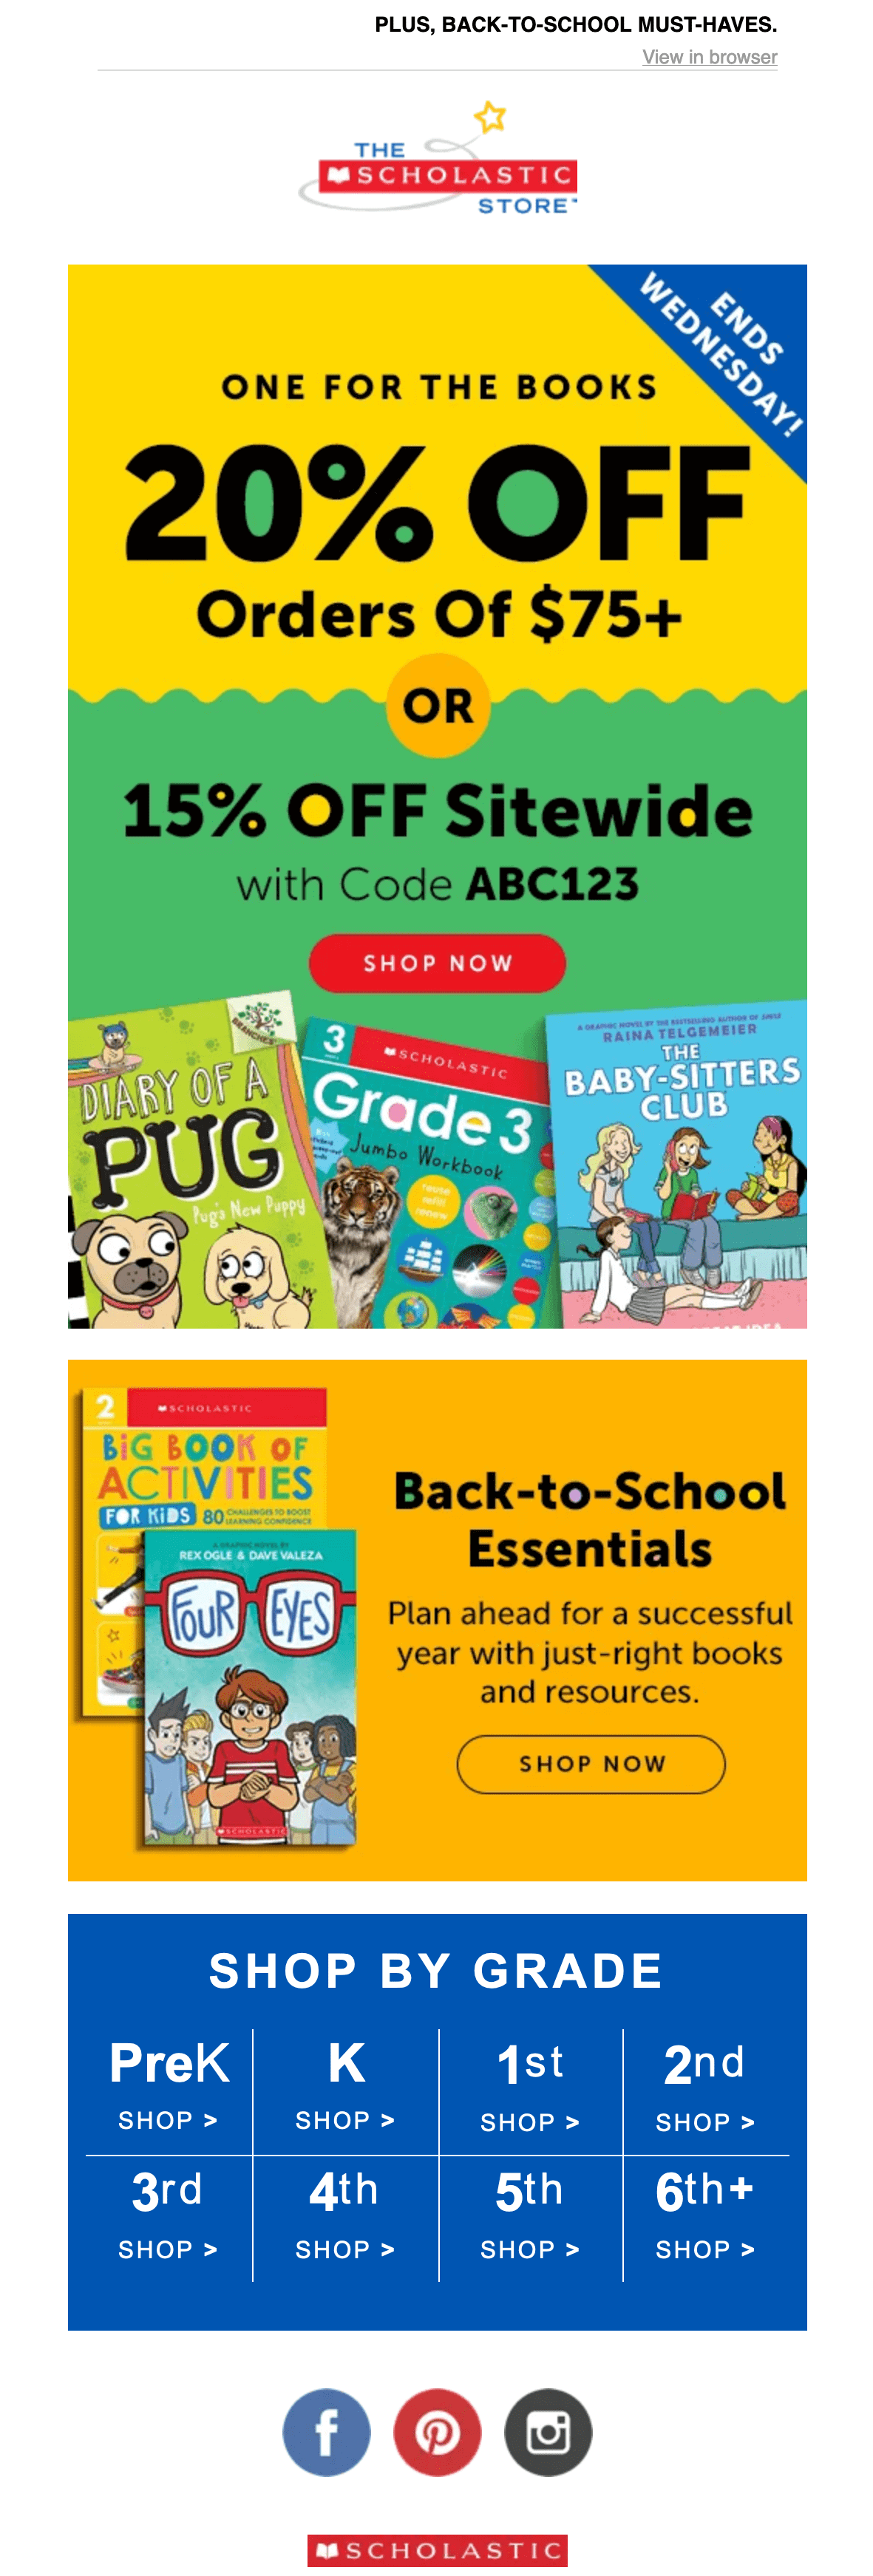 Back-to-school email with site-wide and book discounts and a footer with links to shop by grade